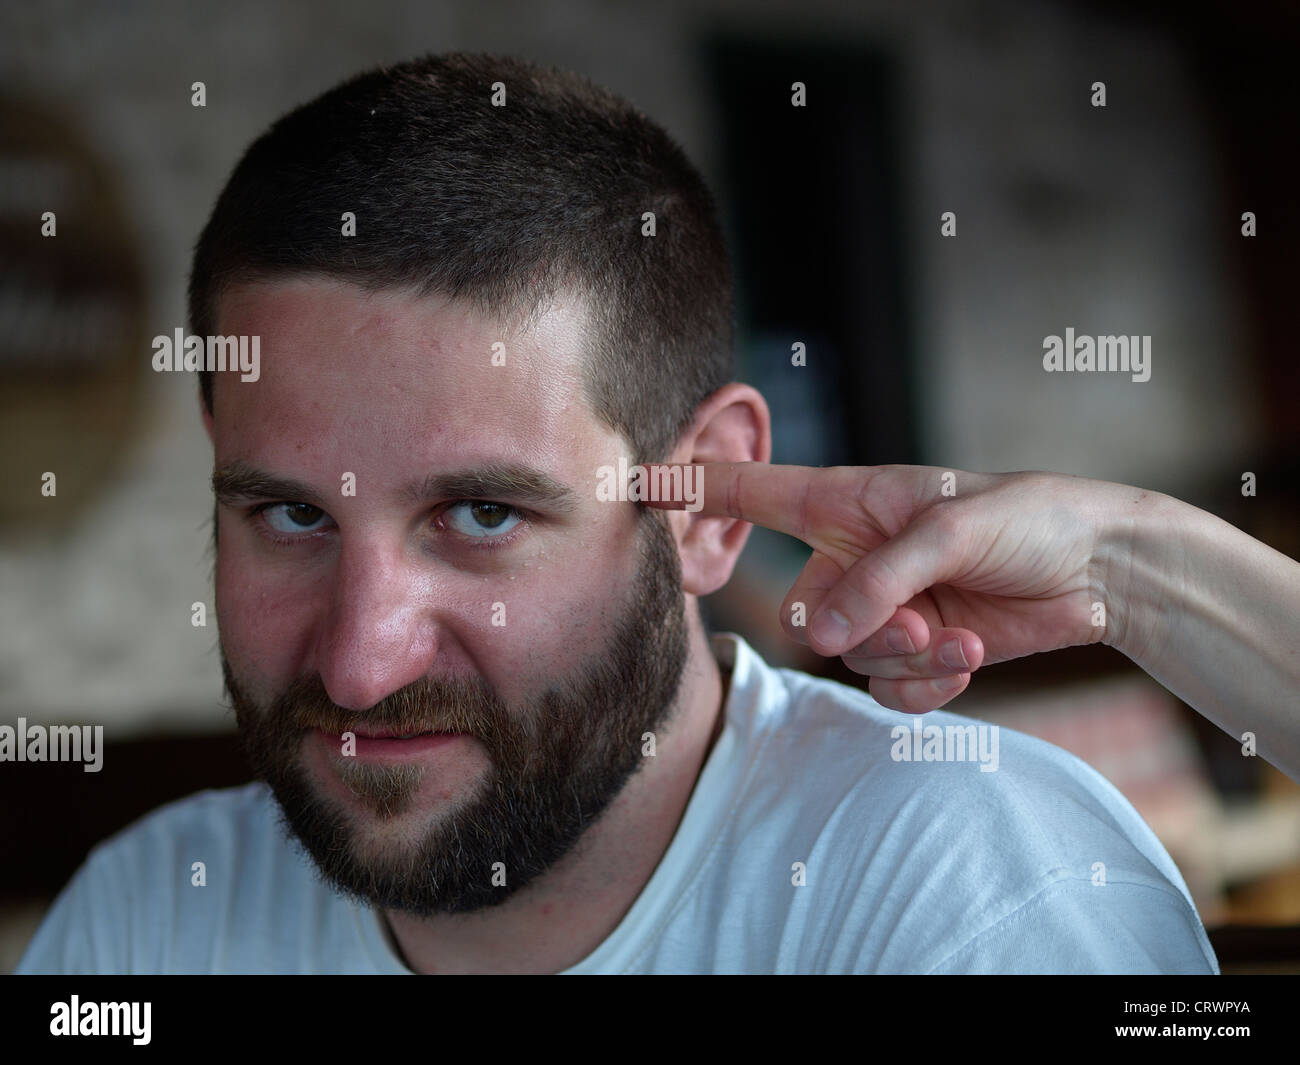 Lady finger point at young man's head Stock Photo